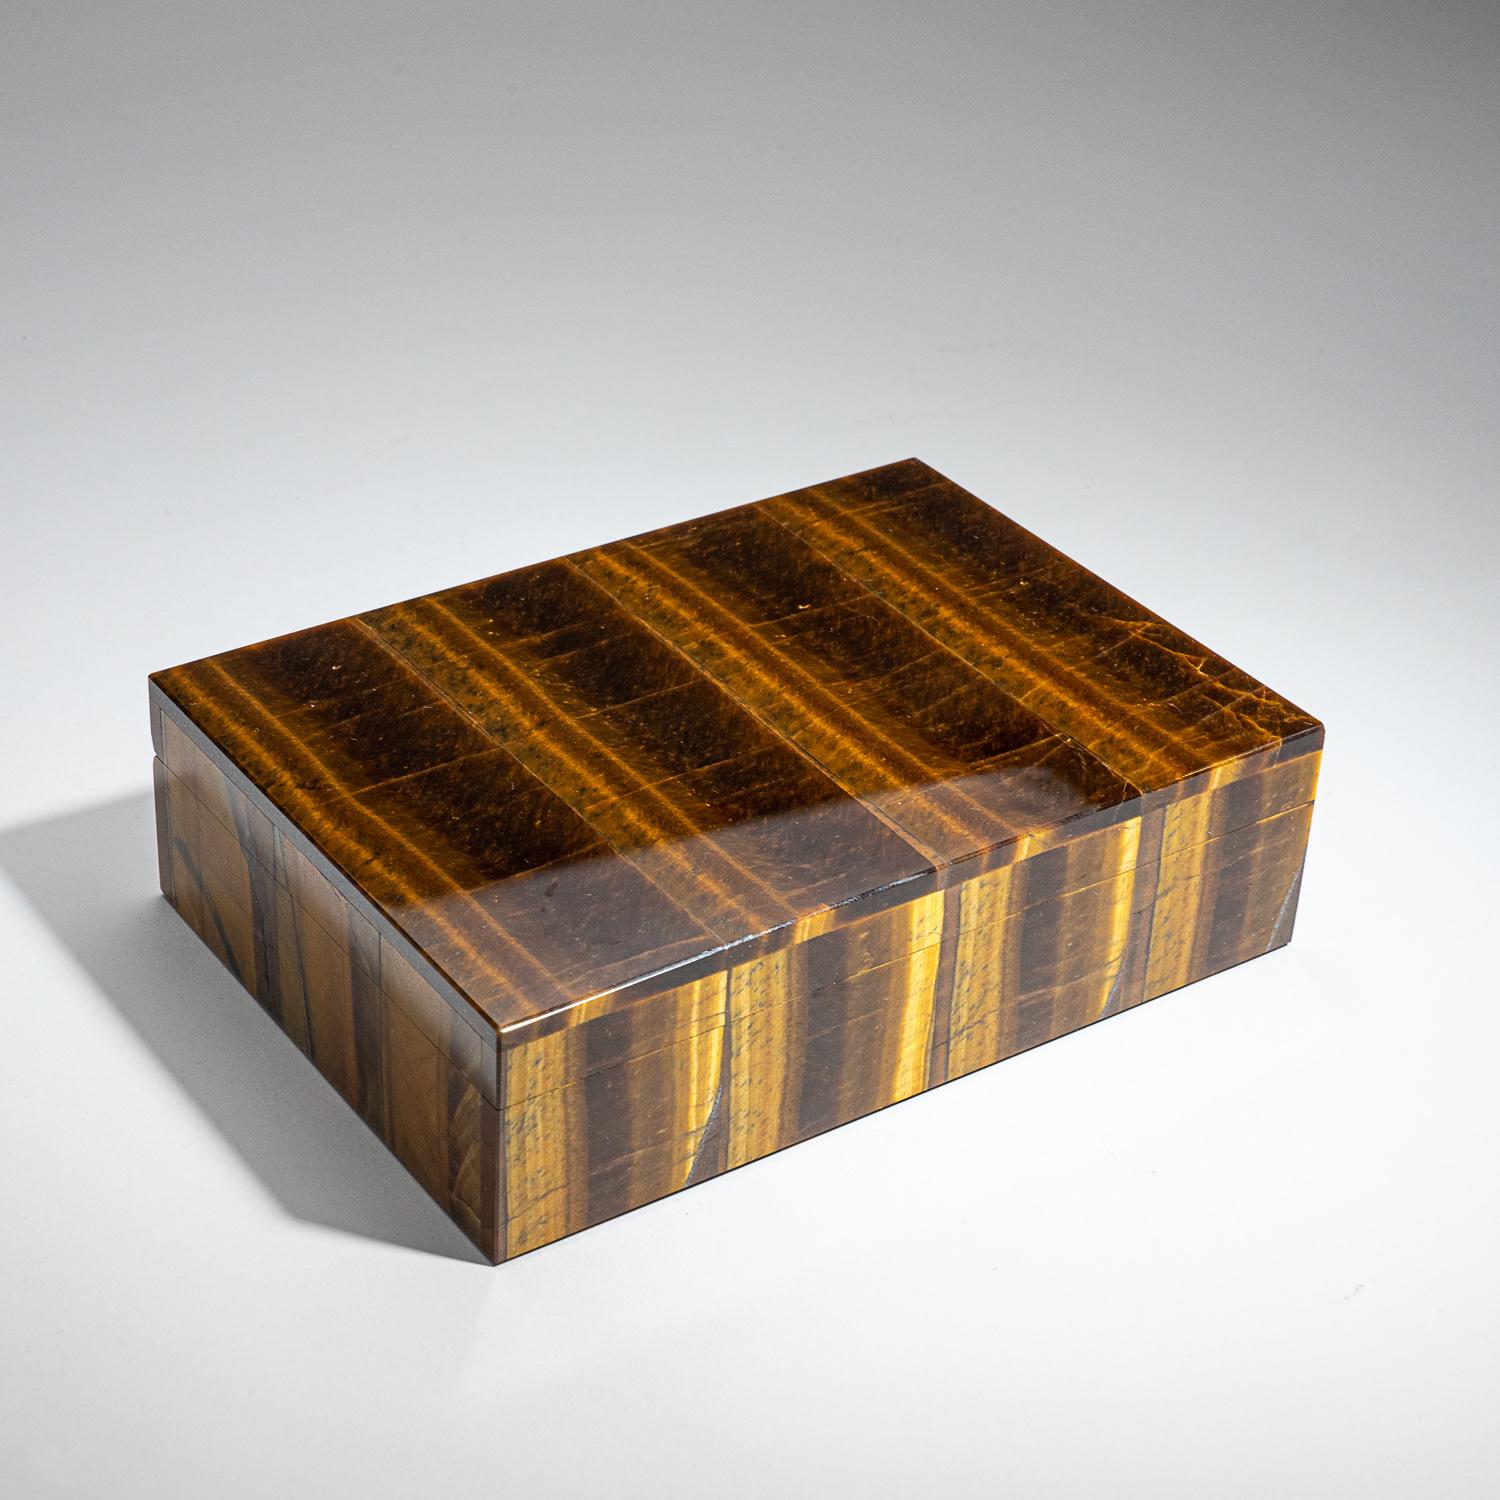 Large rectangle jewelry box handmade from the finest top grade natural Tiger's eye from Africa, with rich golden color and stunning chatoyancy banding. The box has been hand polished to a mirror finish. The lid has a piano hinge opening to reveal a